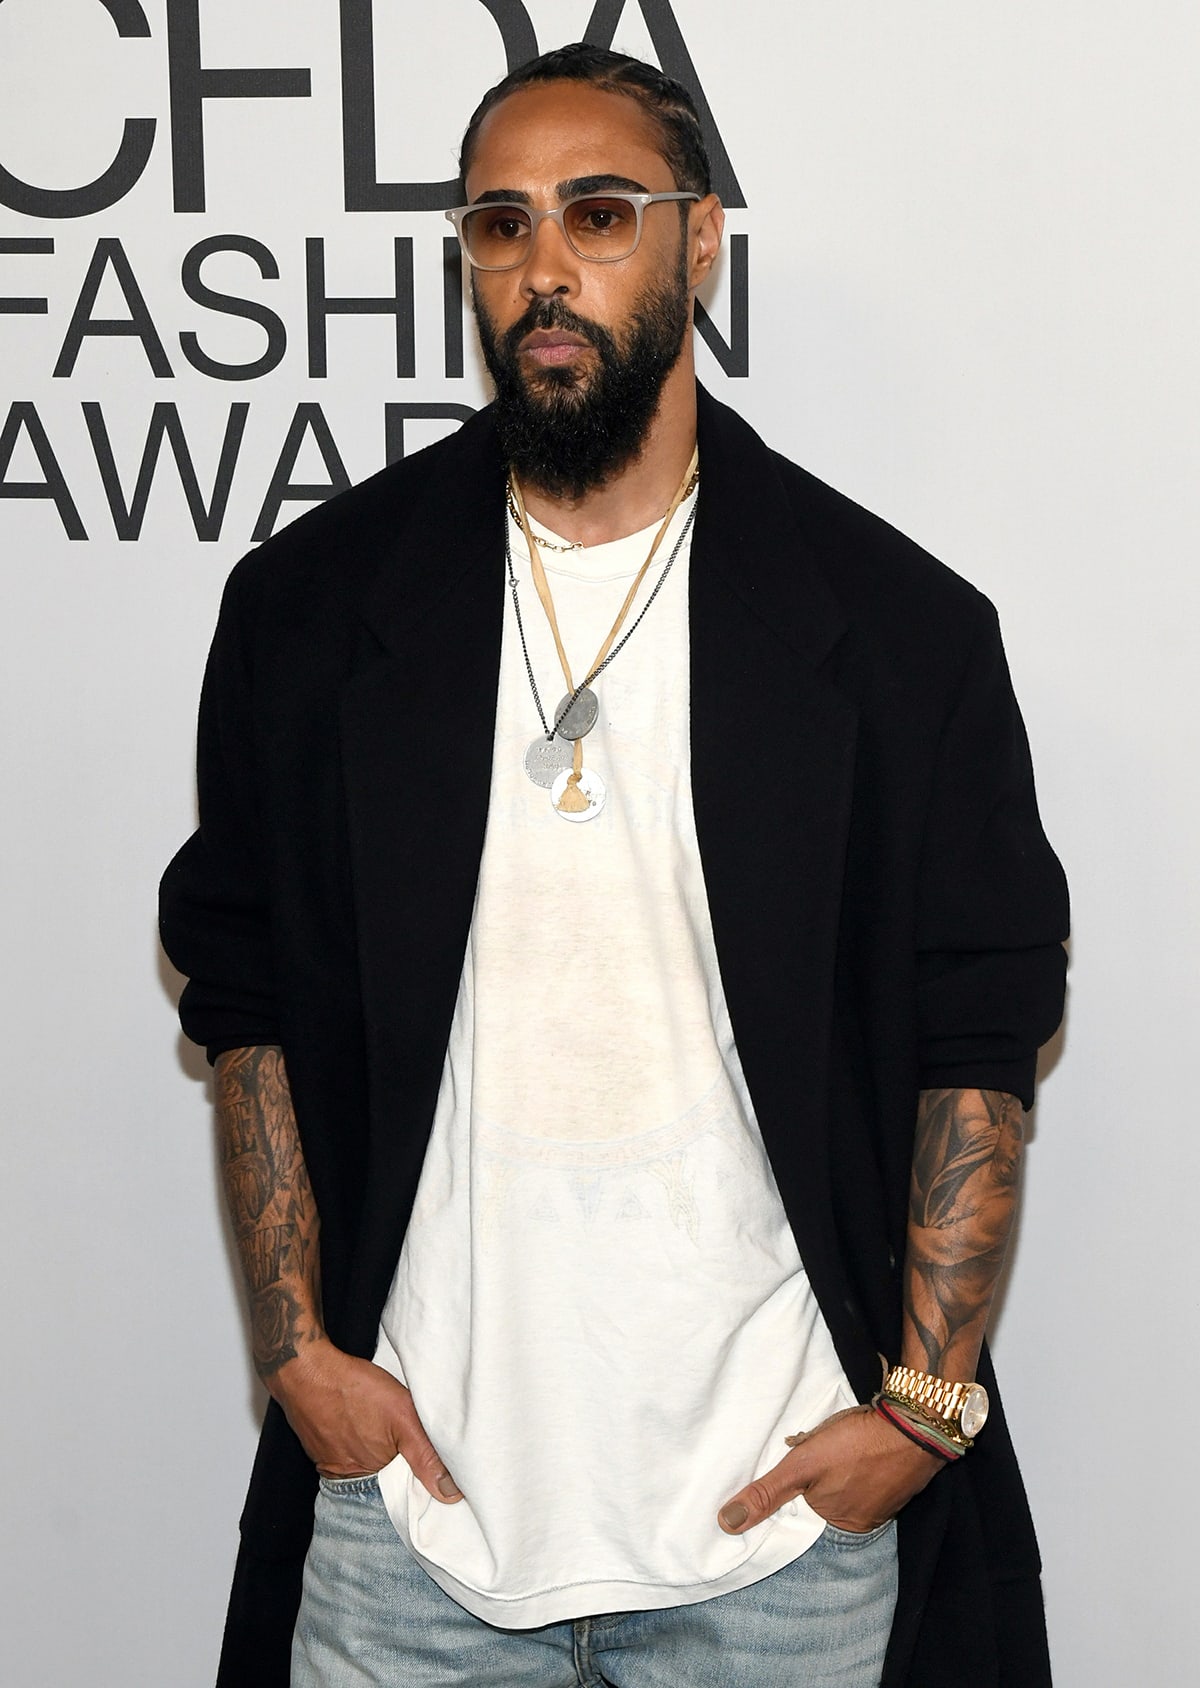 Fashion and sneaker designer Jerry Lorenzo founded the luxury streetwear label Fear of God in 2013